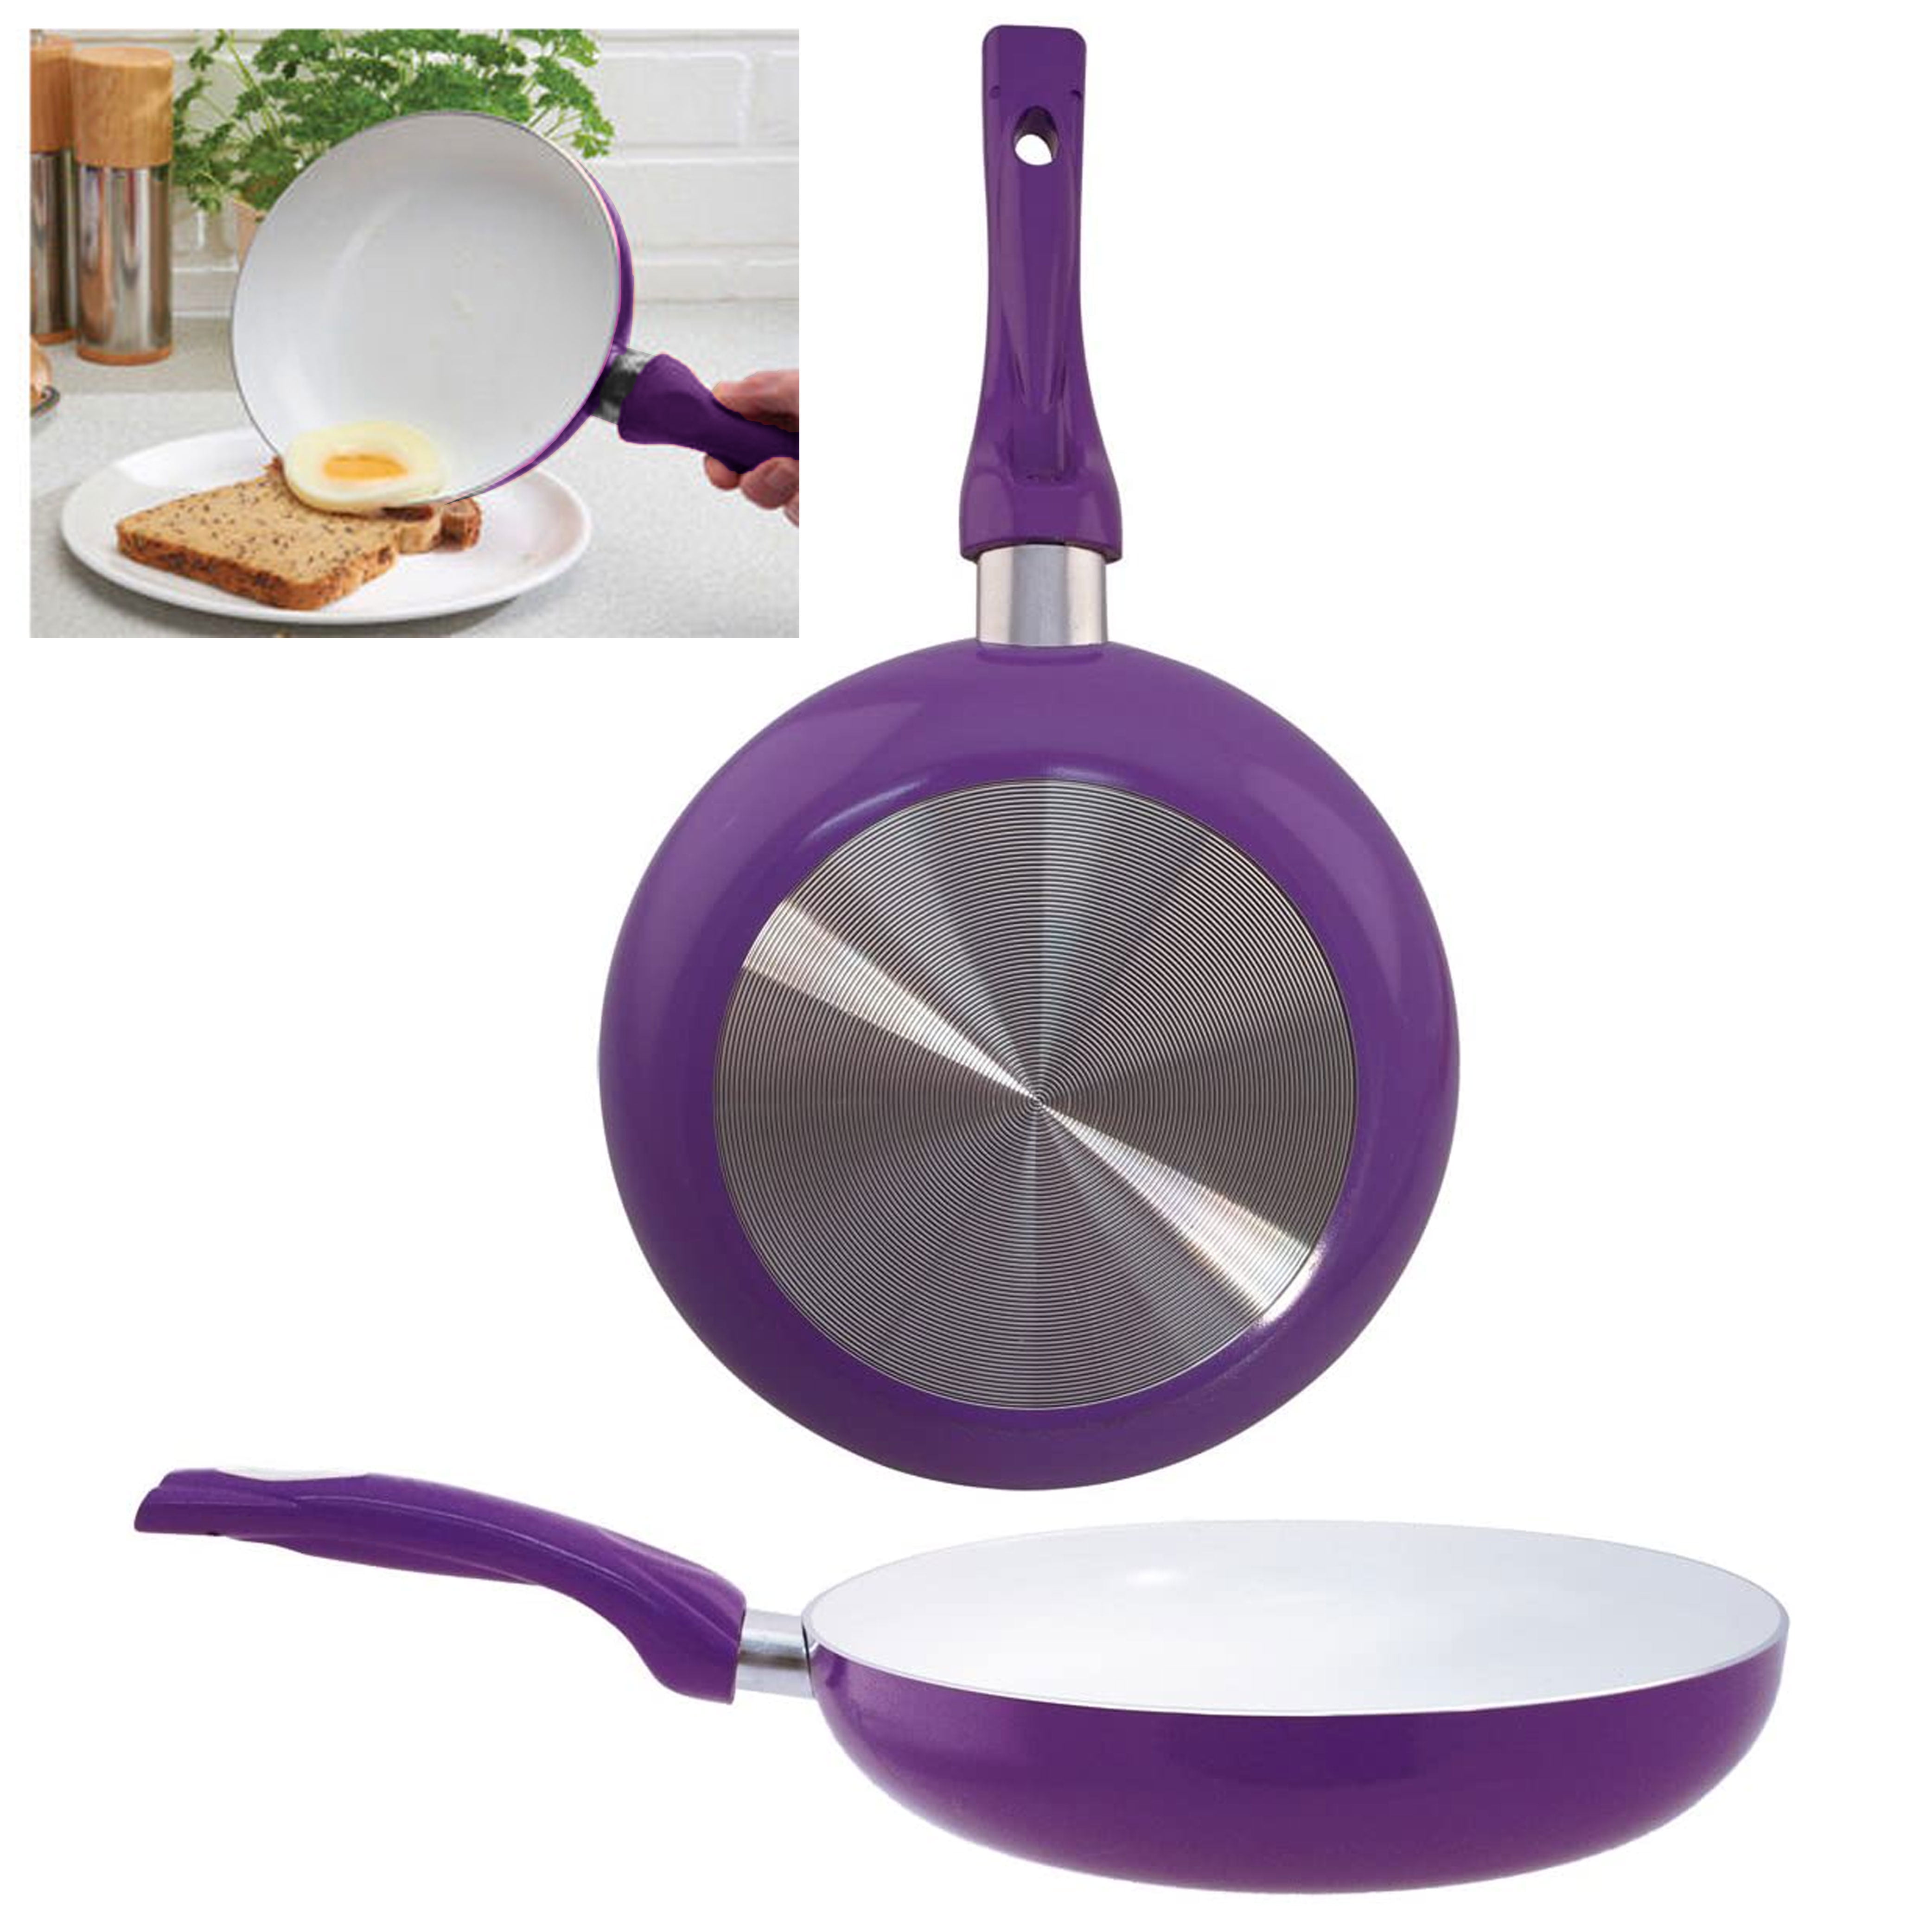 Choice 14 Aluminum Non-Stick Fry Pan with Purple Allergen-Free